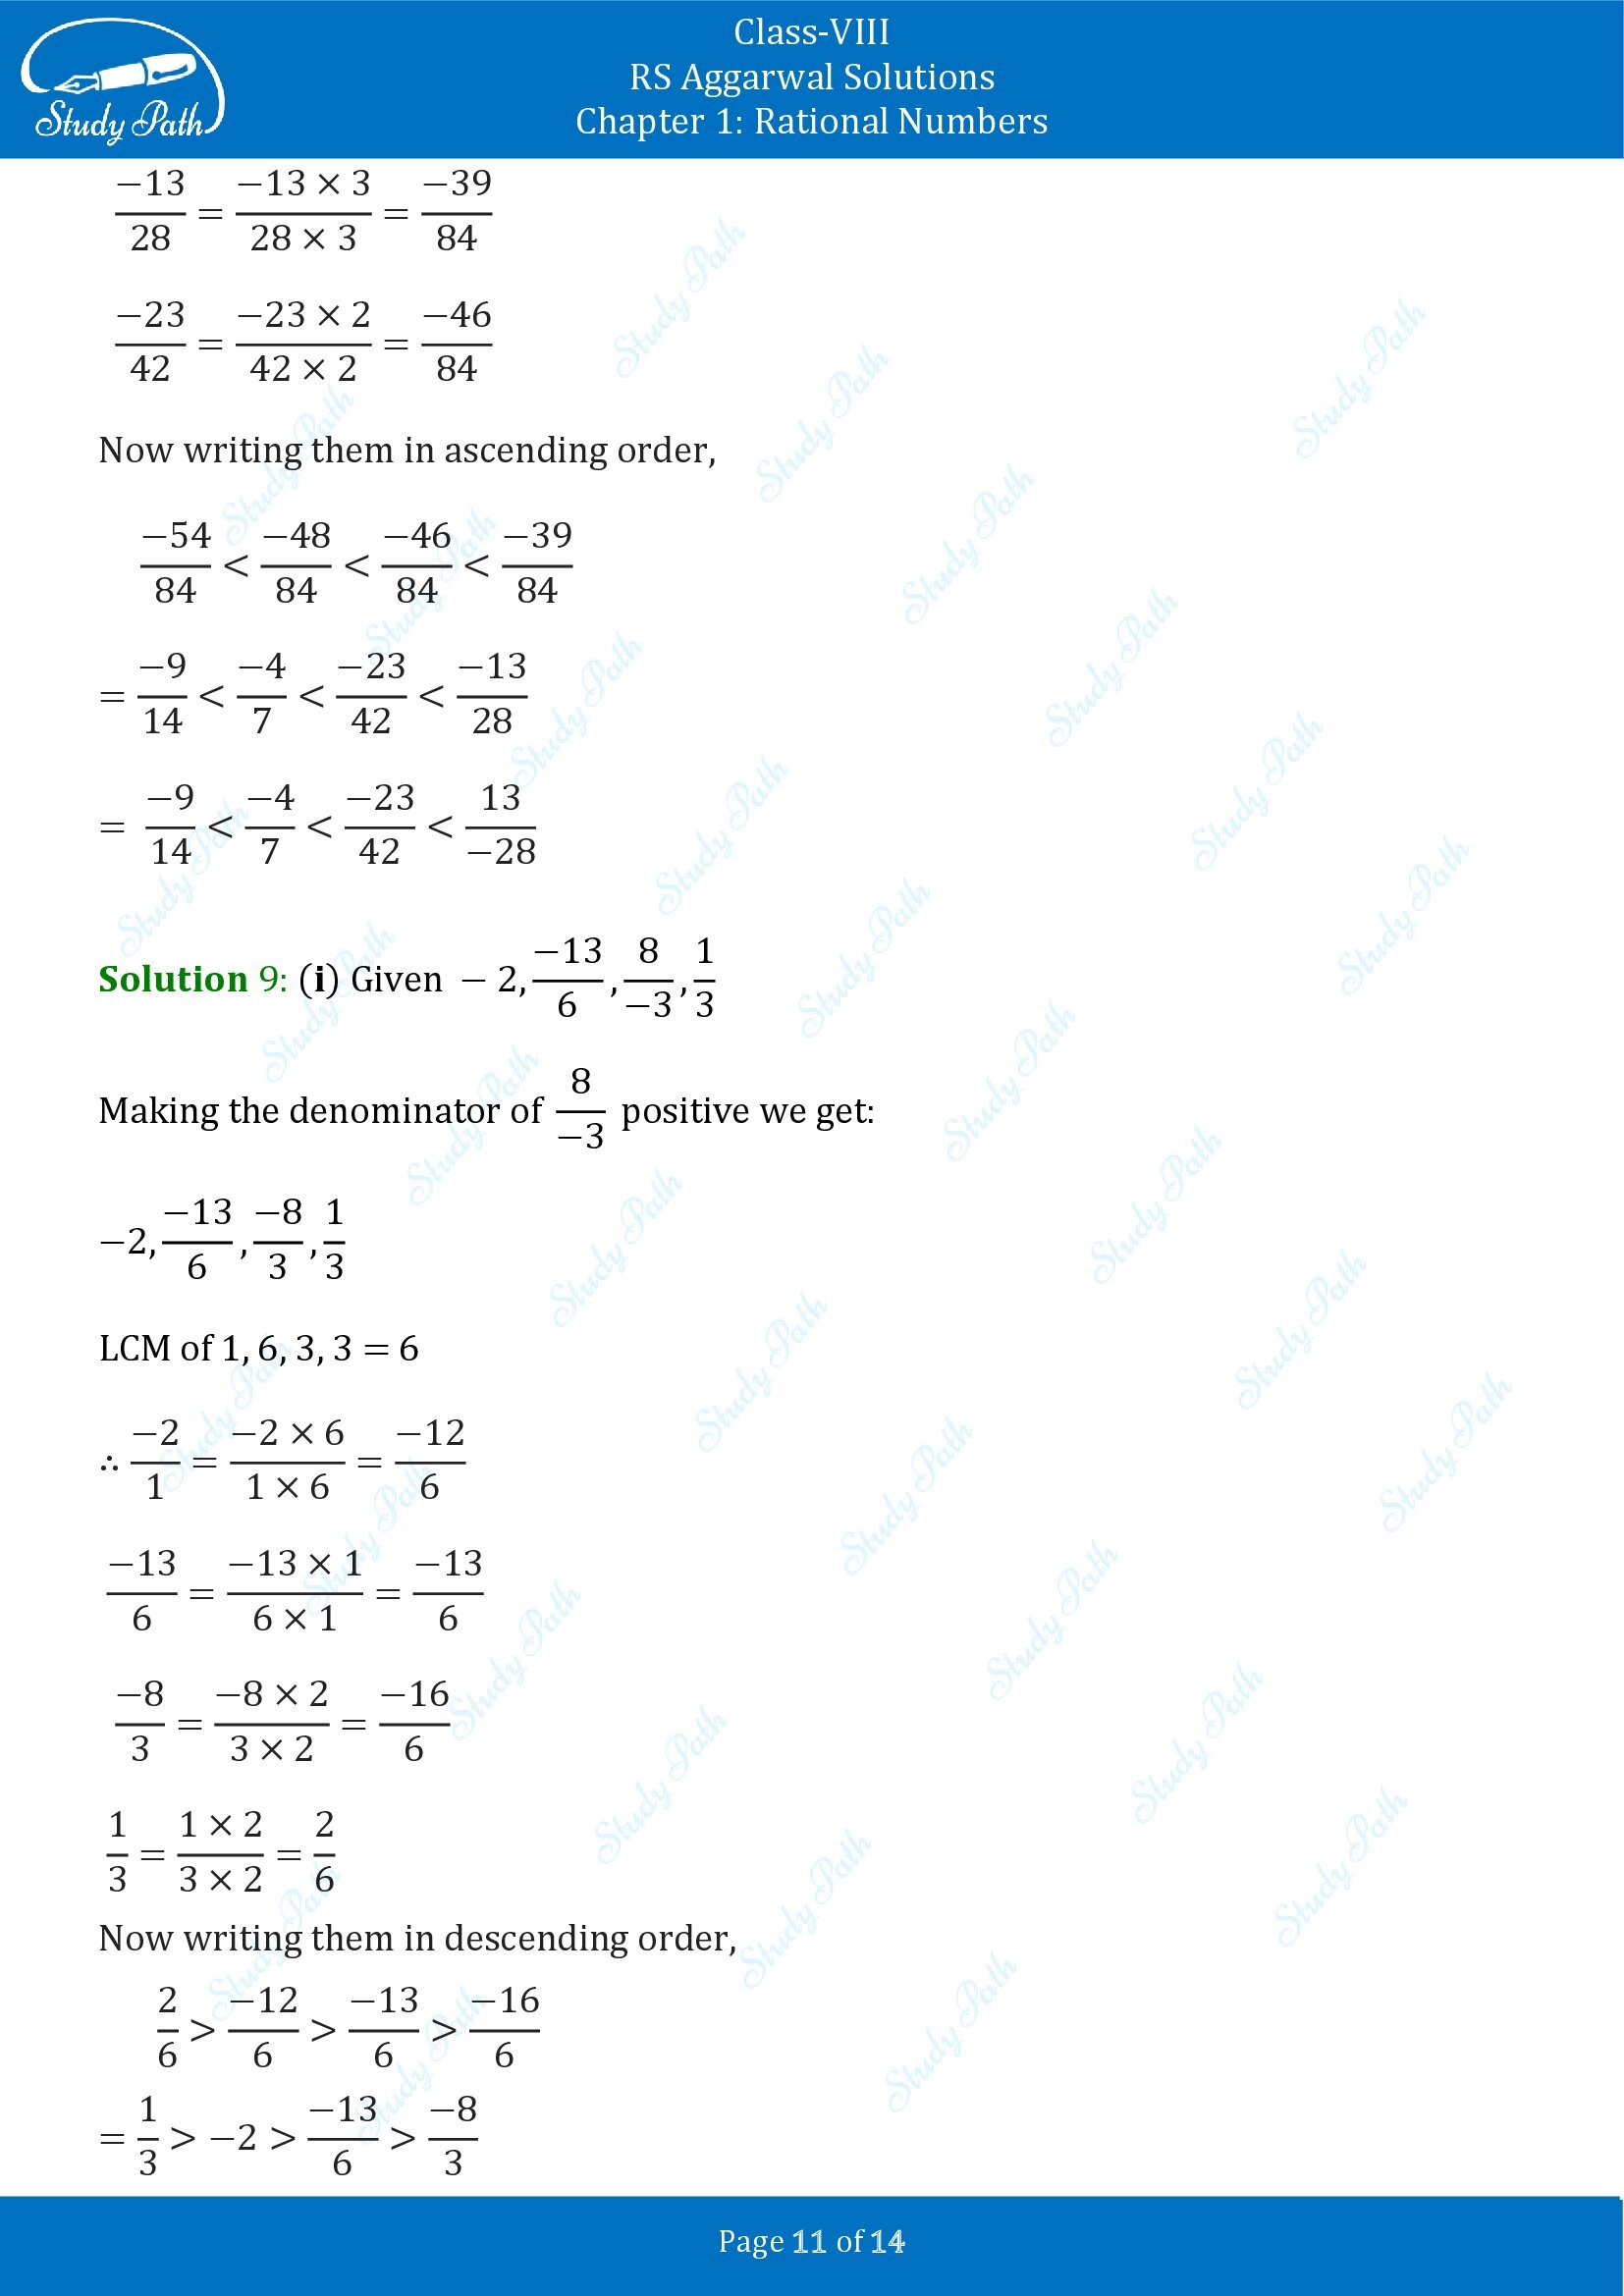 RS Aggarwal Solutions Class 8 Chapter 1 Rational Numbers Exercise 1A 00011